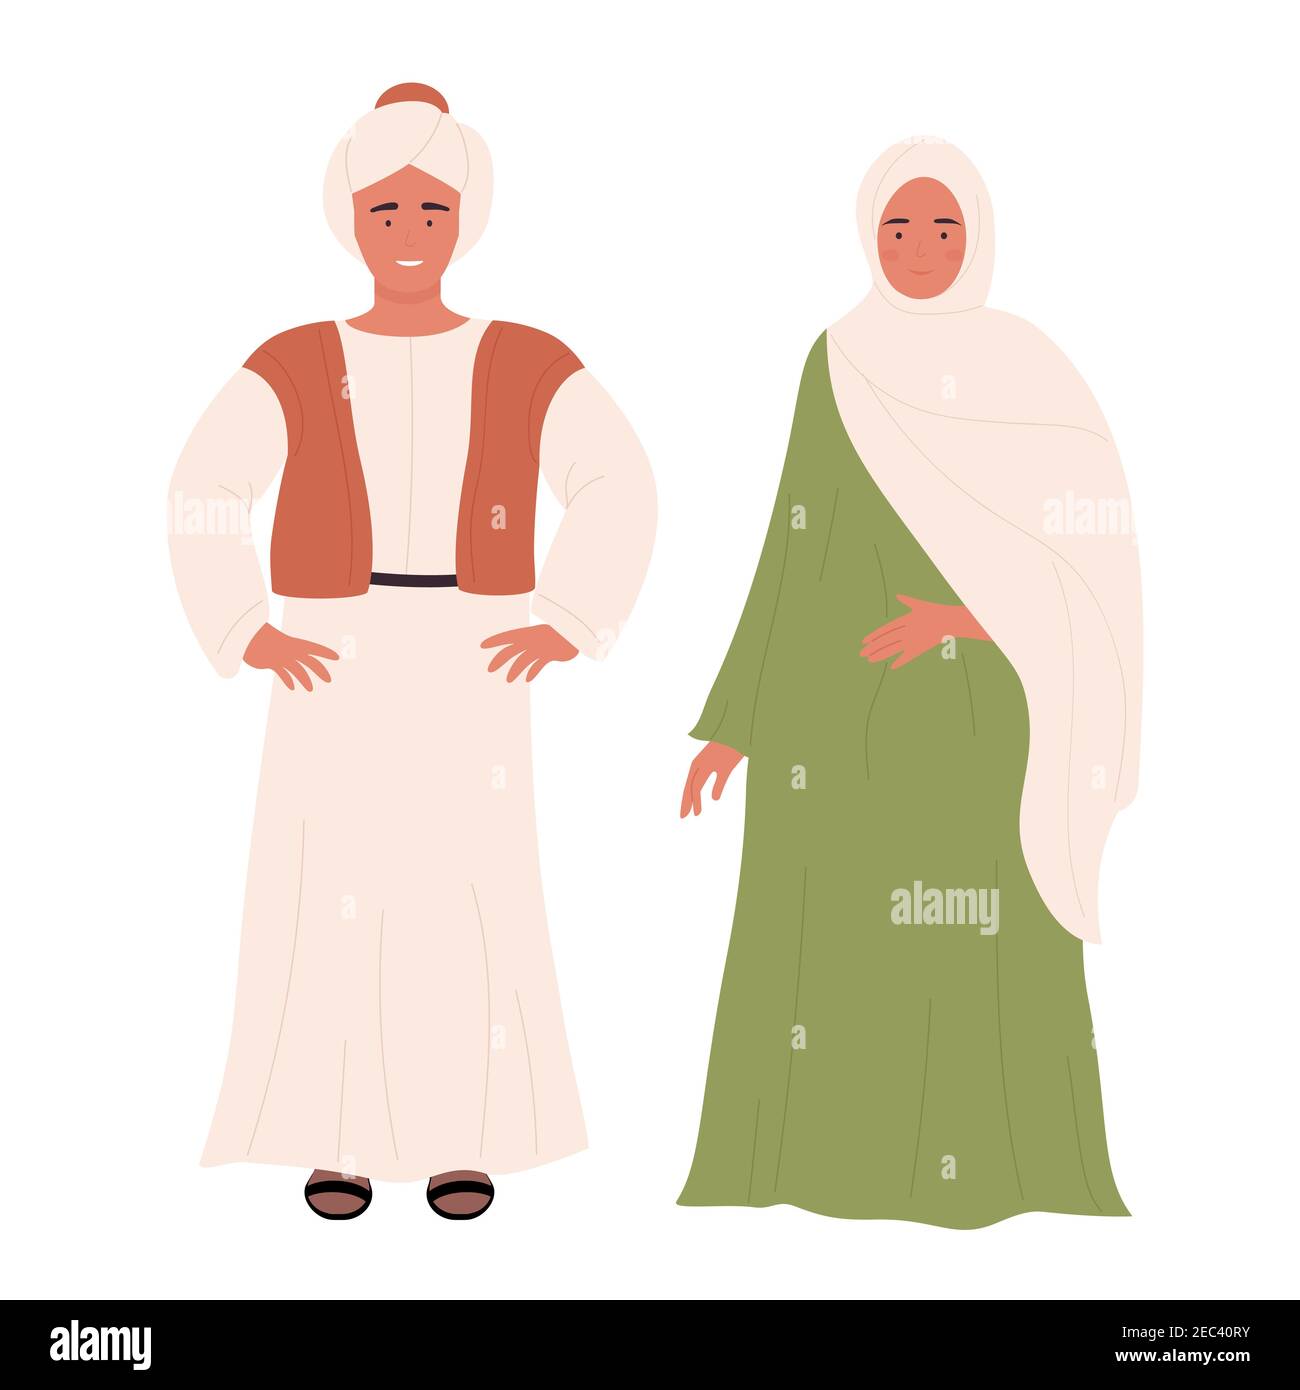 Muslim family or couple people vector illustration. Cartoon arab flat young man woman, arabian husband and wife standing together, saudi characters wearing traditional clothes isolated on white Stock Vector